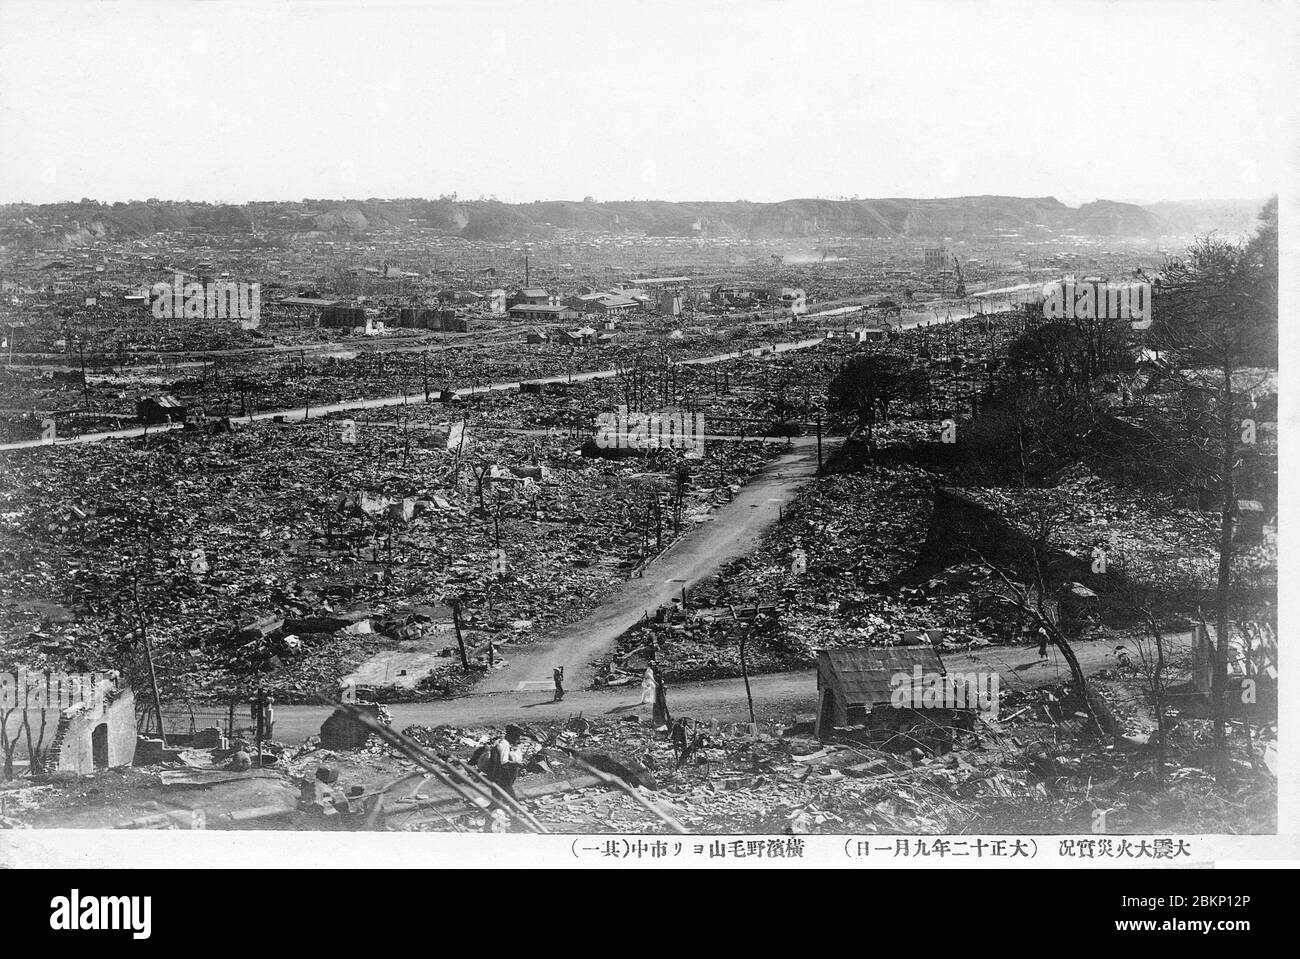 [ 1920s Japan - Yokohama Destroyed by the Great Kanto Earthquake ] —   The ruins of Yokohama after the Great Kanto Earthquake of September 1, 1923 (Taisho 12). The photographer took this sobering photo from  Noge-Yama.  The quake, with an estimated magnitude between 7.9 and 8.4 on the Richter scale, devastated Tokyo, the port city of Yokohama, surrounding prefectures of Chiba, Kanagawa, and Shizuoka, and claimed over 140,000 victims.  Photo number 1 of 4.  20th century vintage postcard. Stock Photo